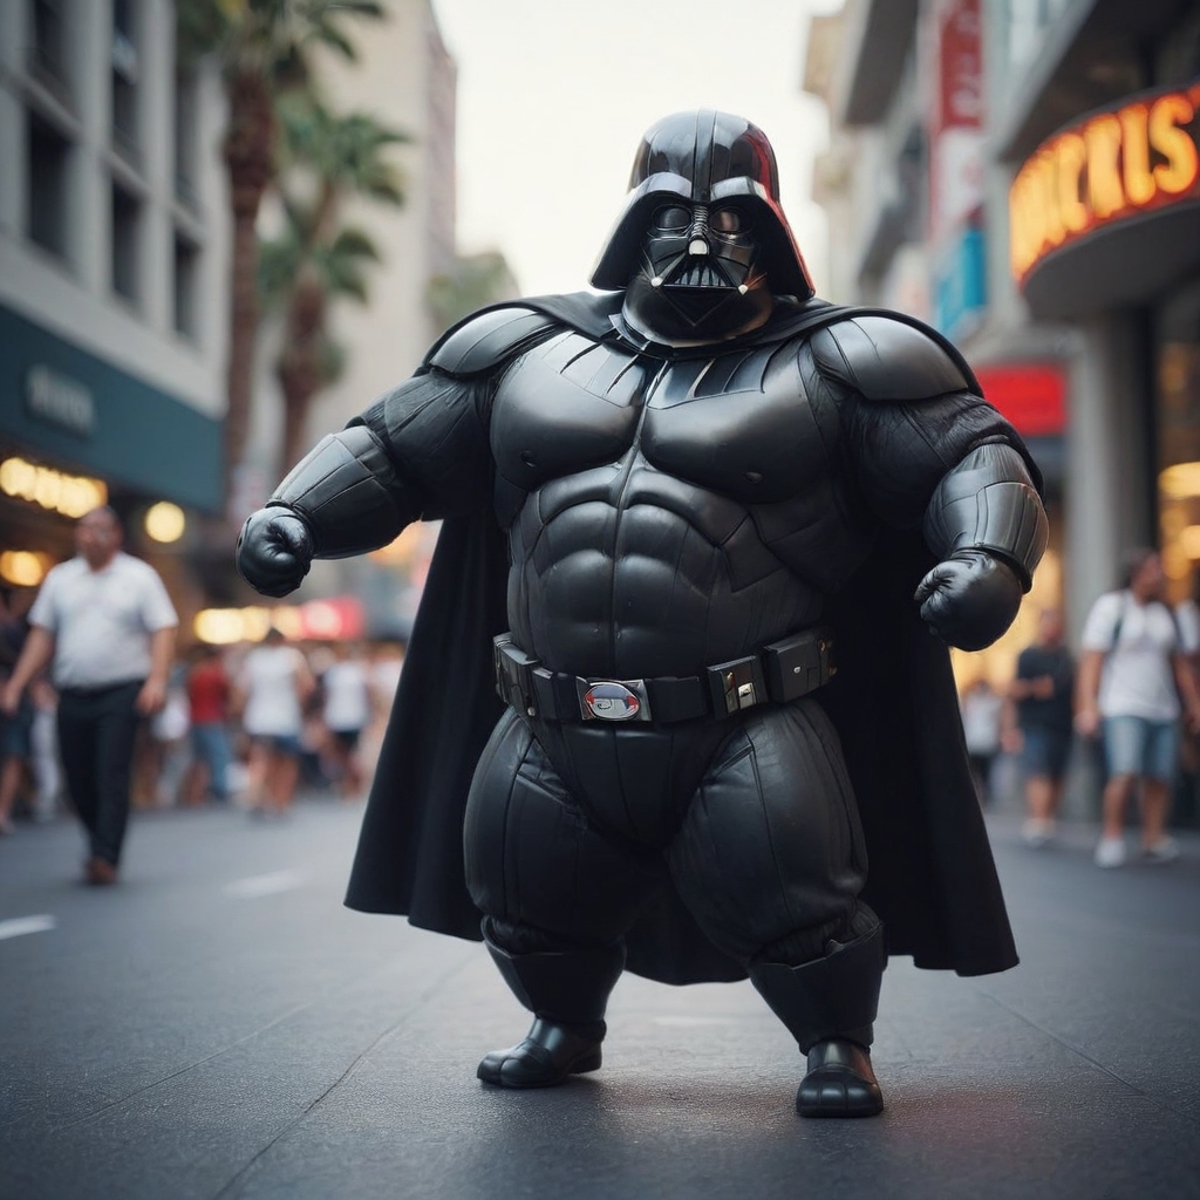 A man dressed in a Darth Vader costume on a crowded street.